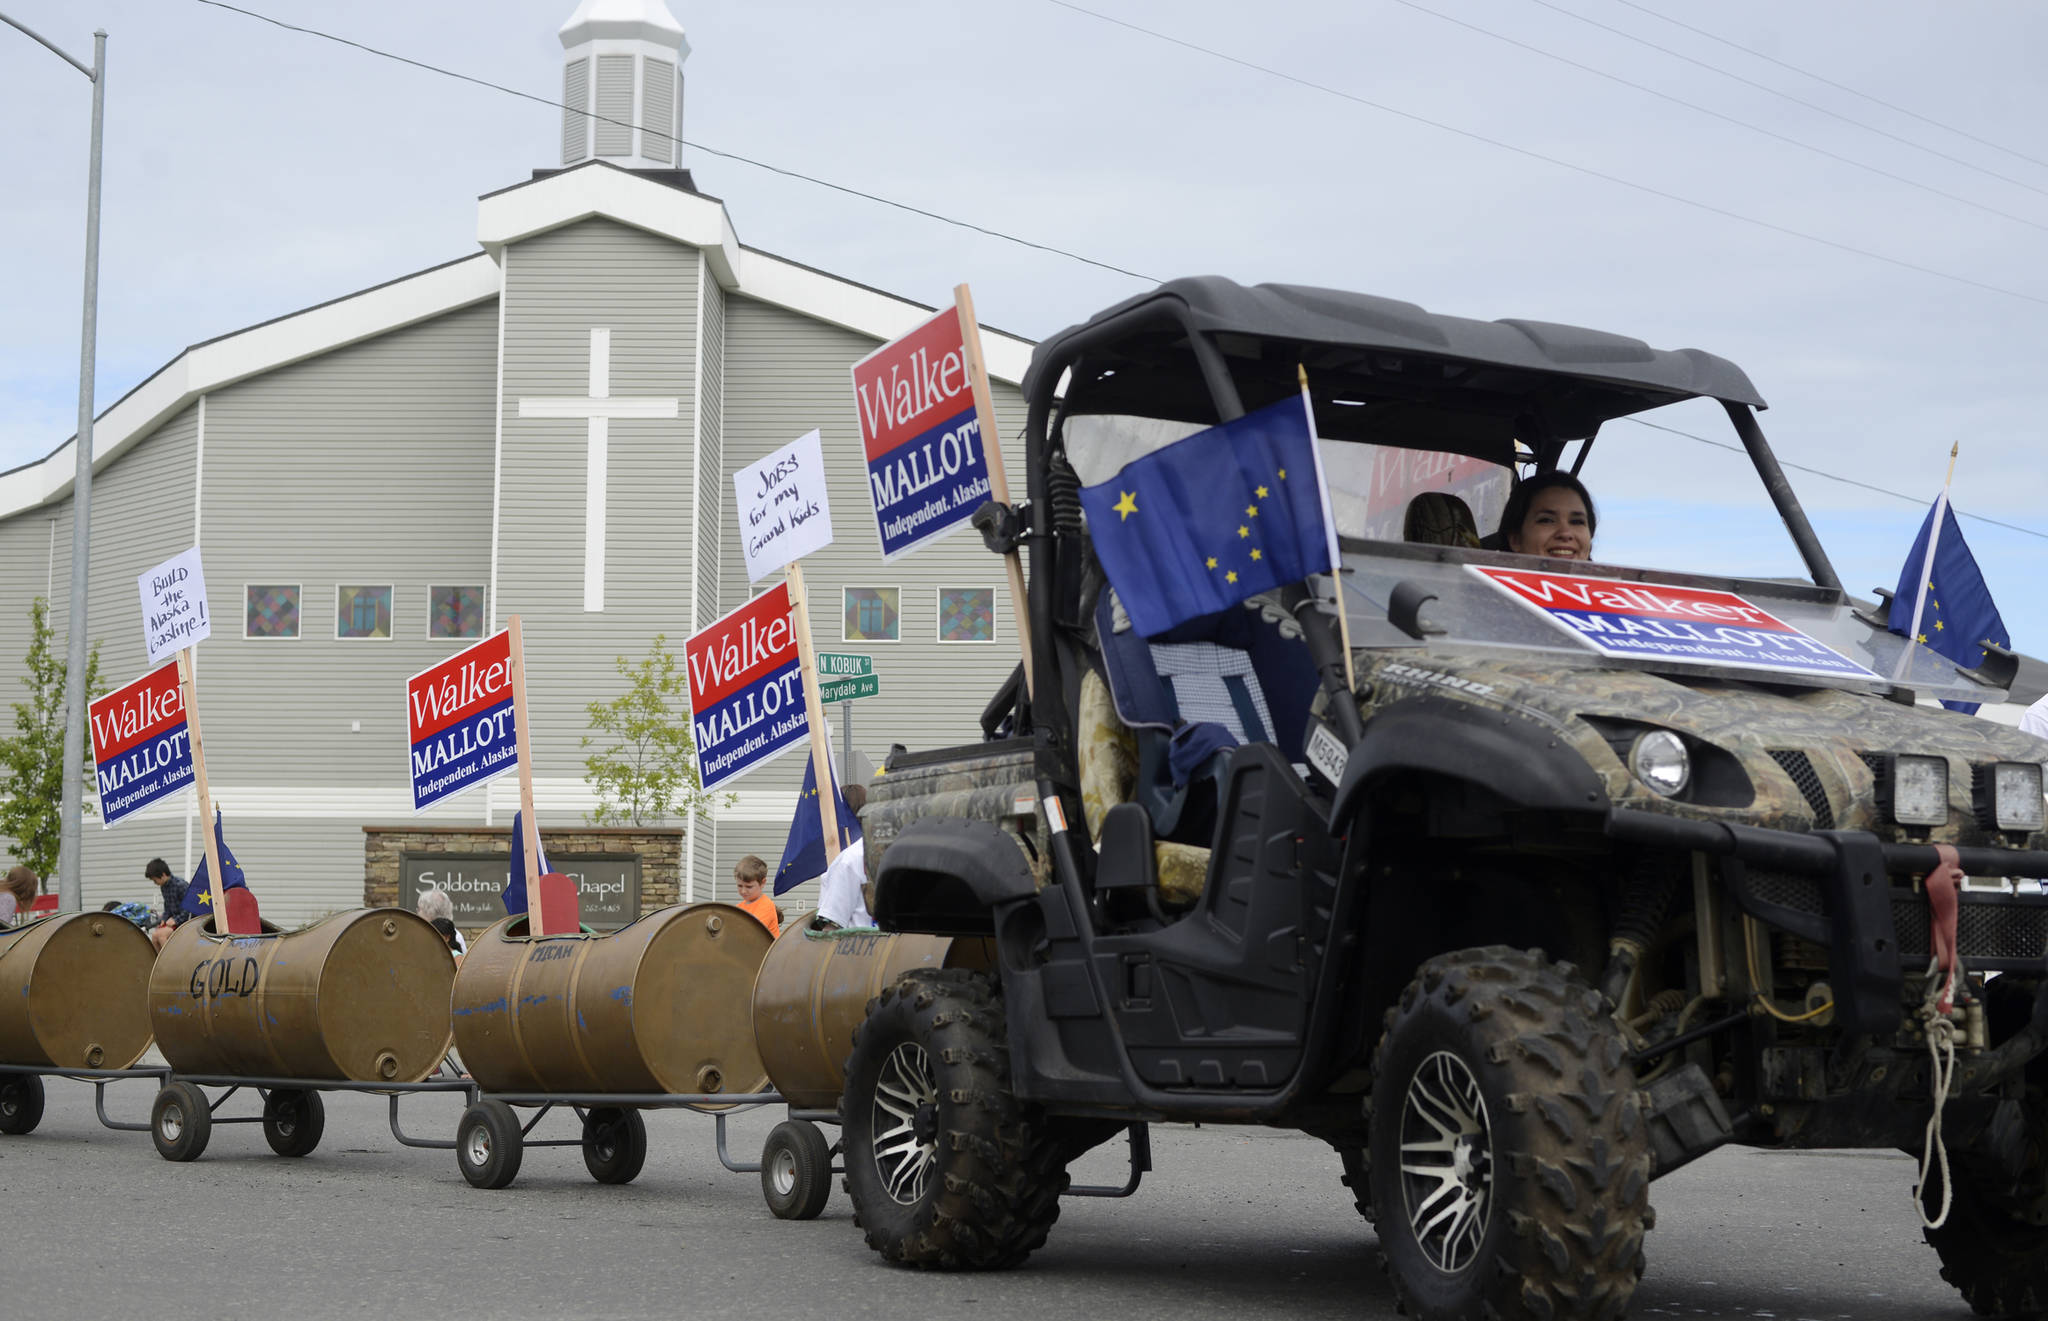 Volunteers for Gov. Bill Walker’s gubernatorial reelection campaign float in the Progress Days parade make their way down Marydale Avenue on Saturday, July 28, 2018 in Soldotna, Alaska. The parade kicks off the weekend-long event celebrating Soldotna’s history, with a market on Saturday and Sunday in Soldotna Creek Park and a concert Saturday night followed by a free community barbecue Sunday. (Photo by Elizabeth Earl/Peninsula Clarion)